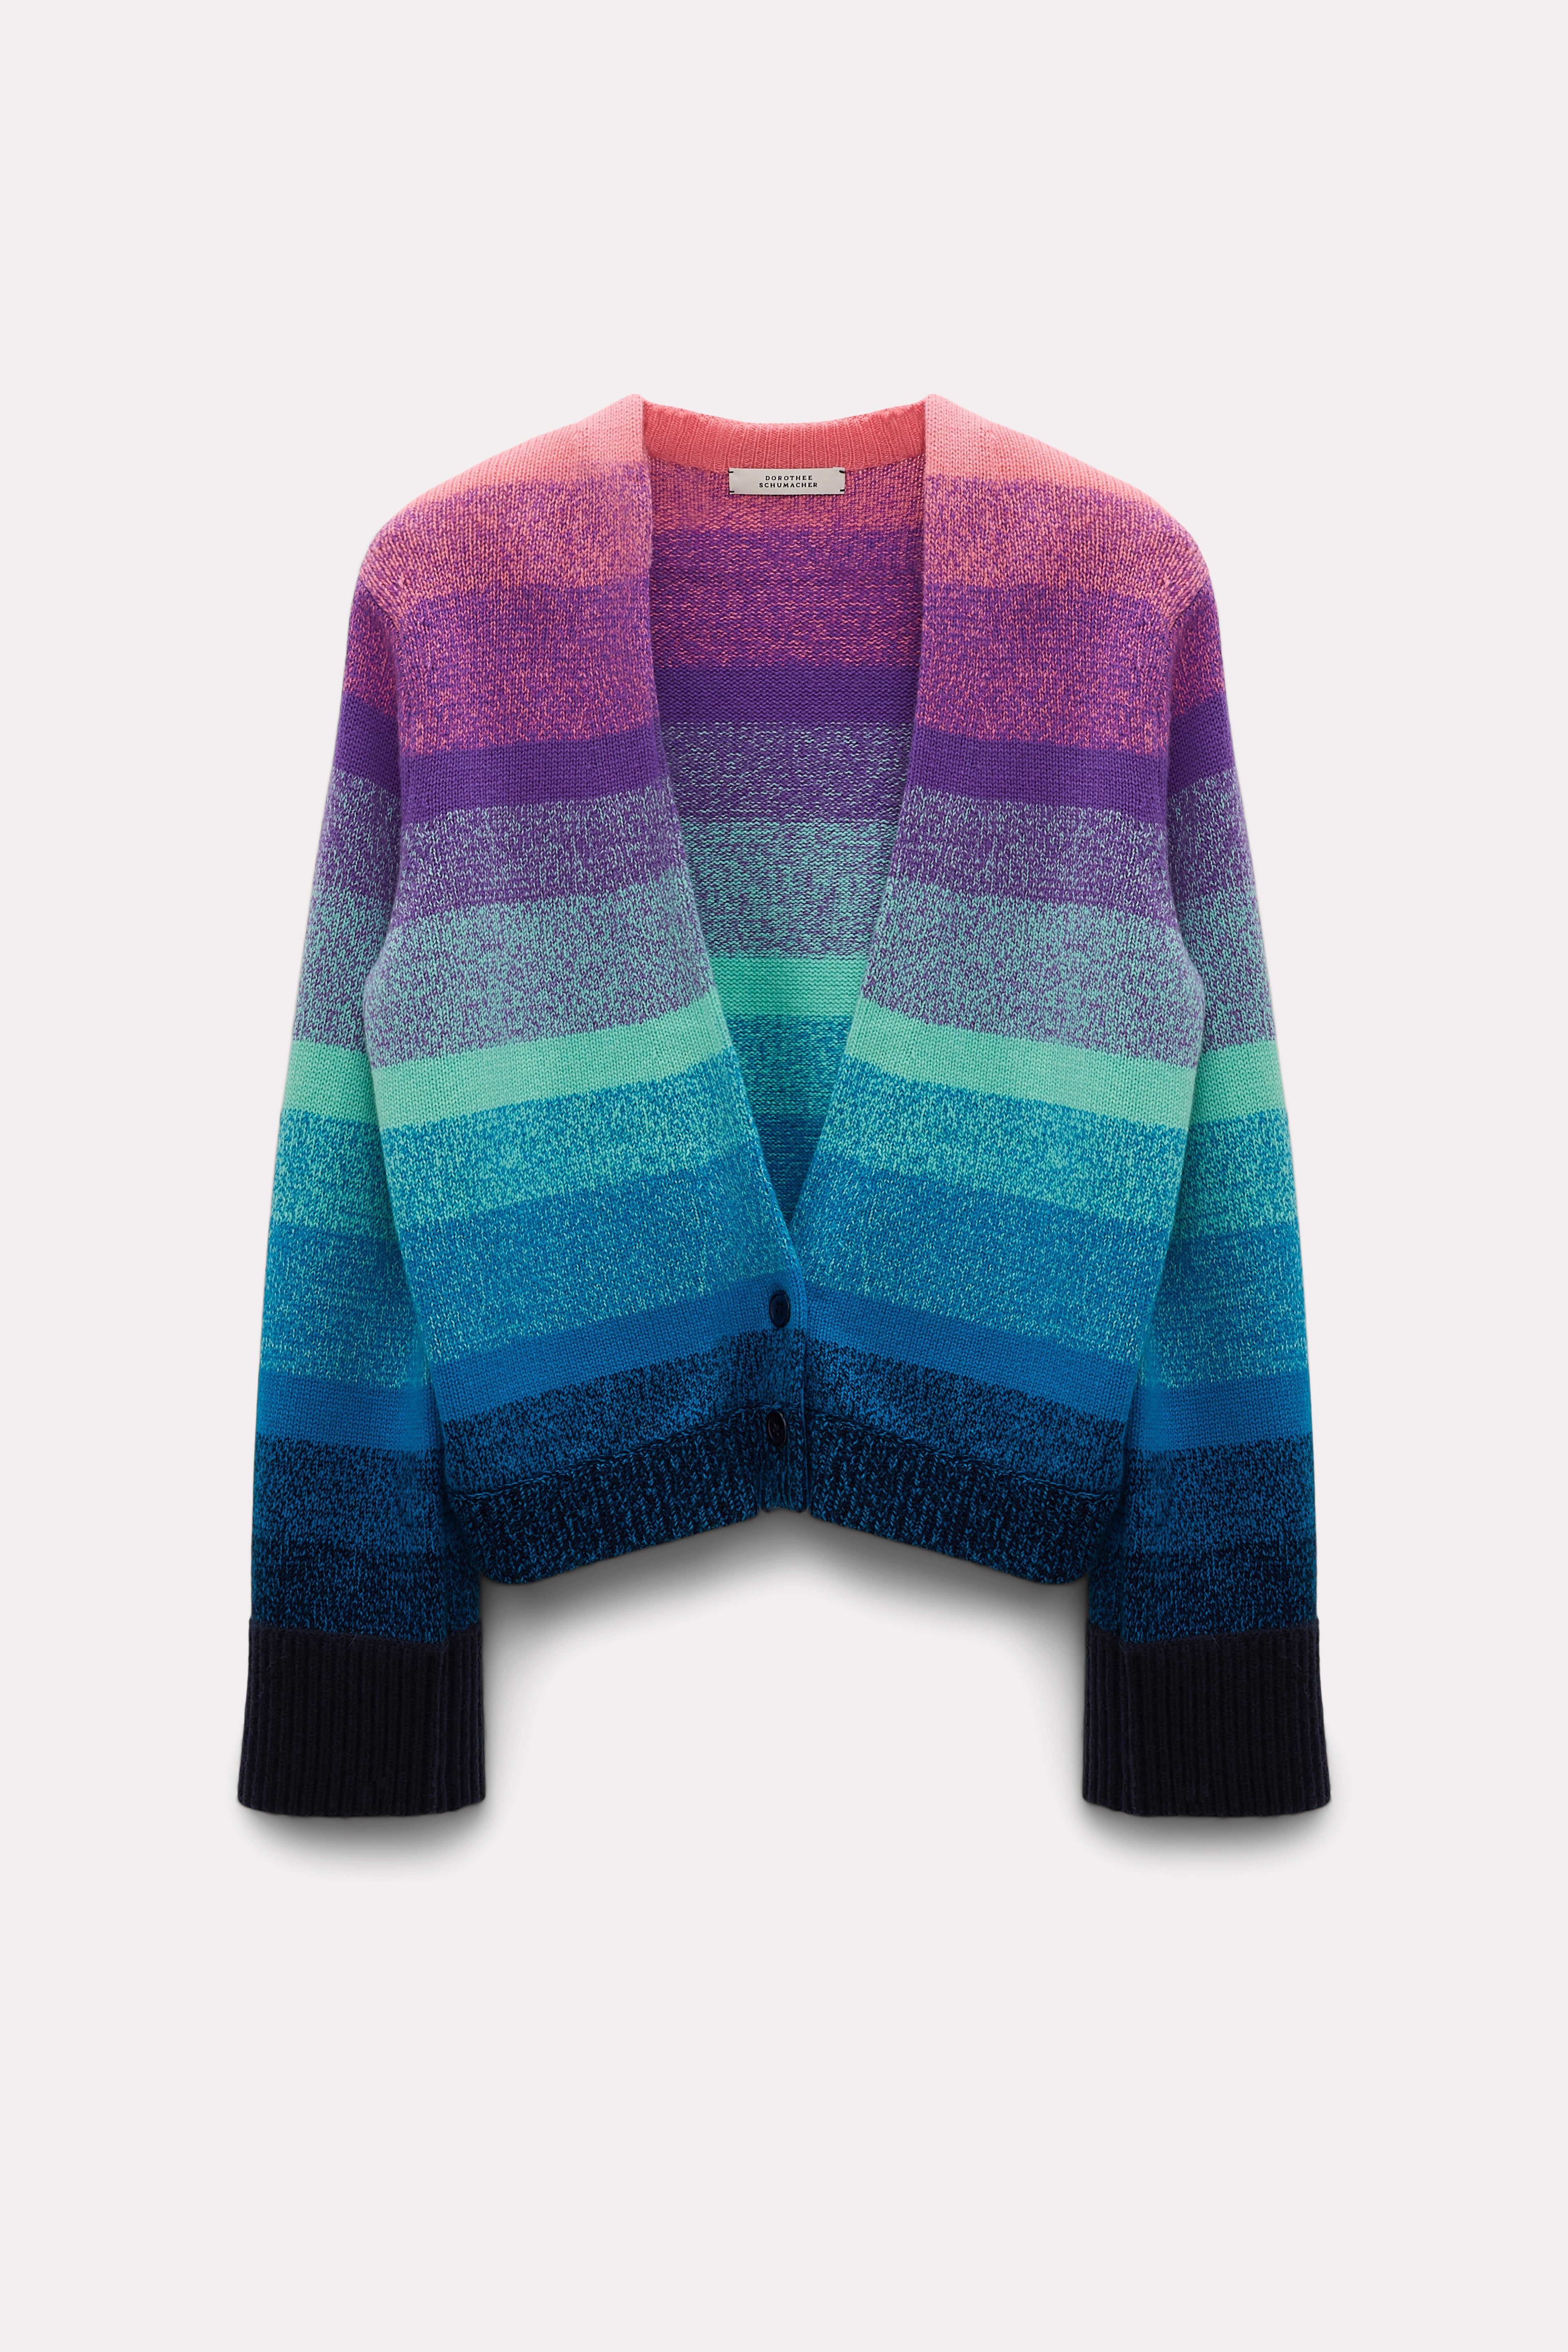 Dorothee-Schumacher-OUTLET-SALE-CHROMATIC-STATEMENTS-cardigan-Strick-ARCHIVE-COLLECTION.jpg